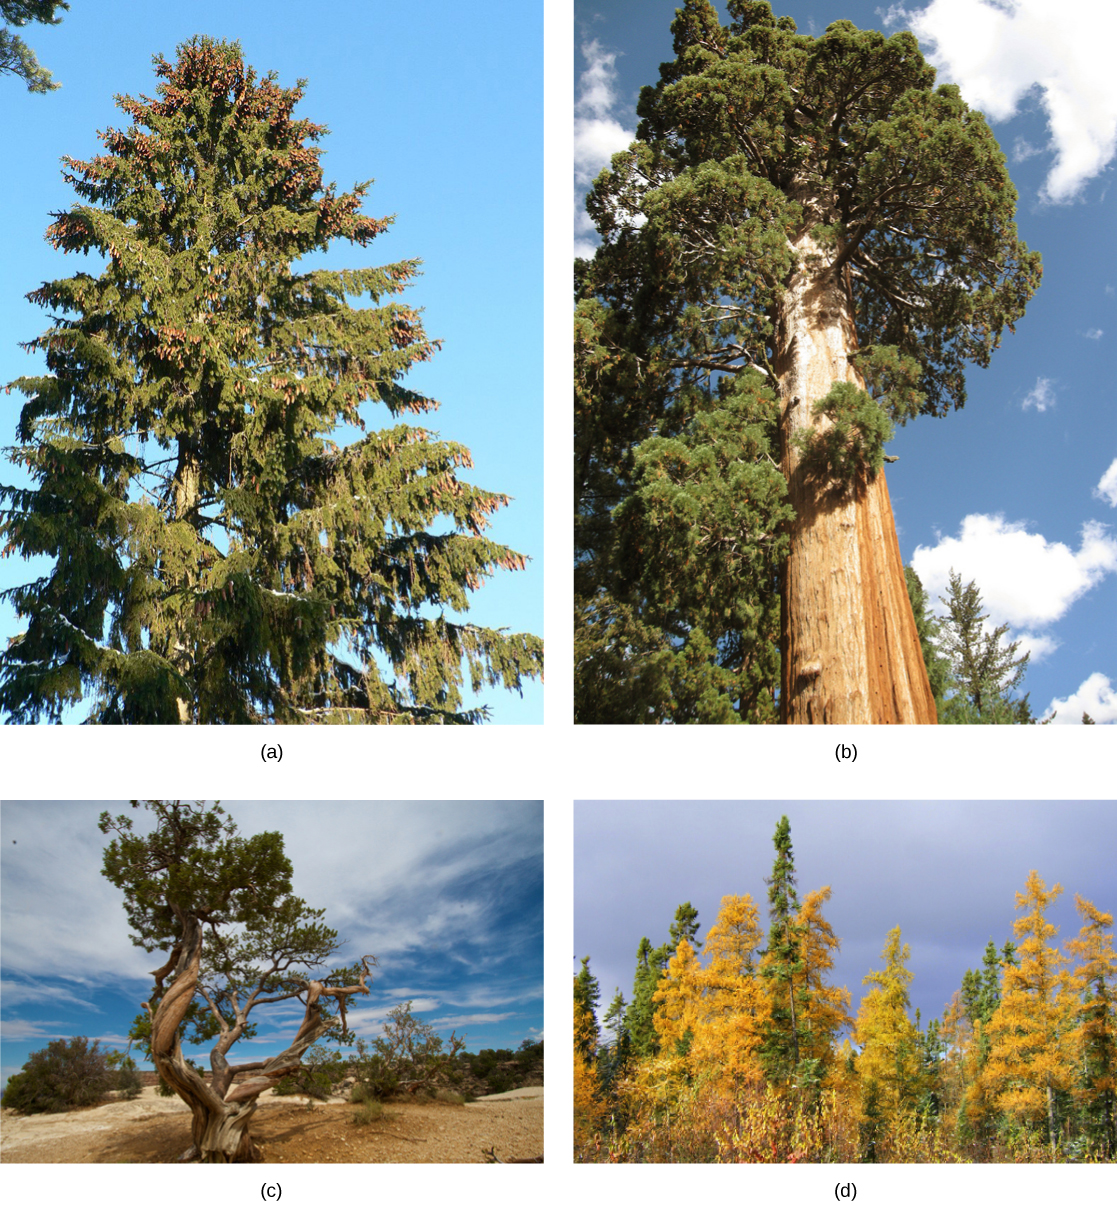  Photo A shows a tall spruce tree covered in pine cones. Photo B shows a sequoia with a tall, broad trunk and branches starting high up the trunk. Photo C shows a juniper tree with a gnarled trunk. Part D shows a forest of tamarack with yellow needles.